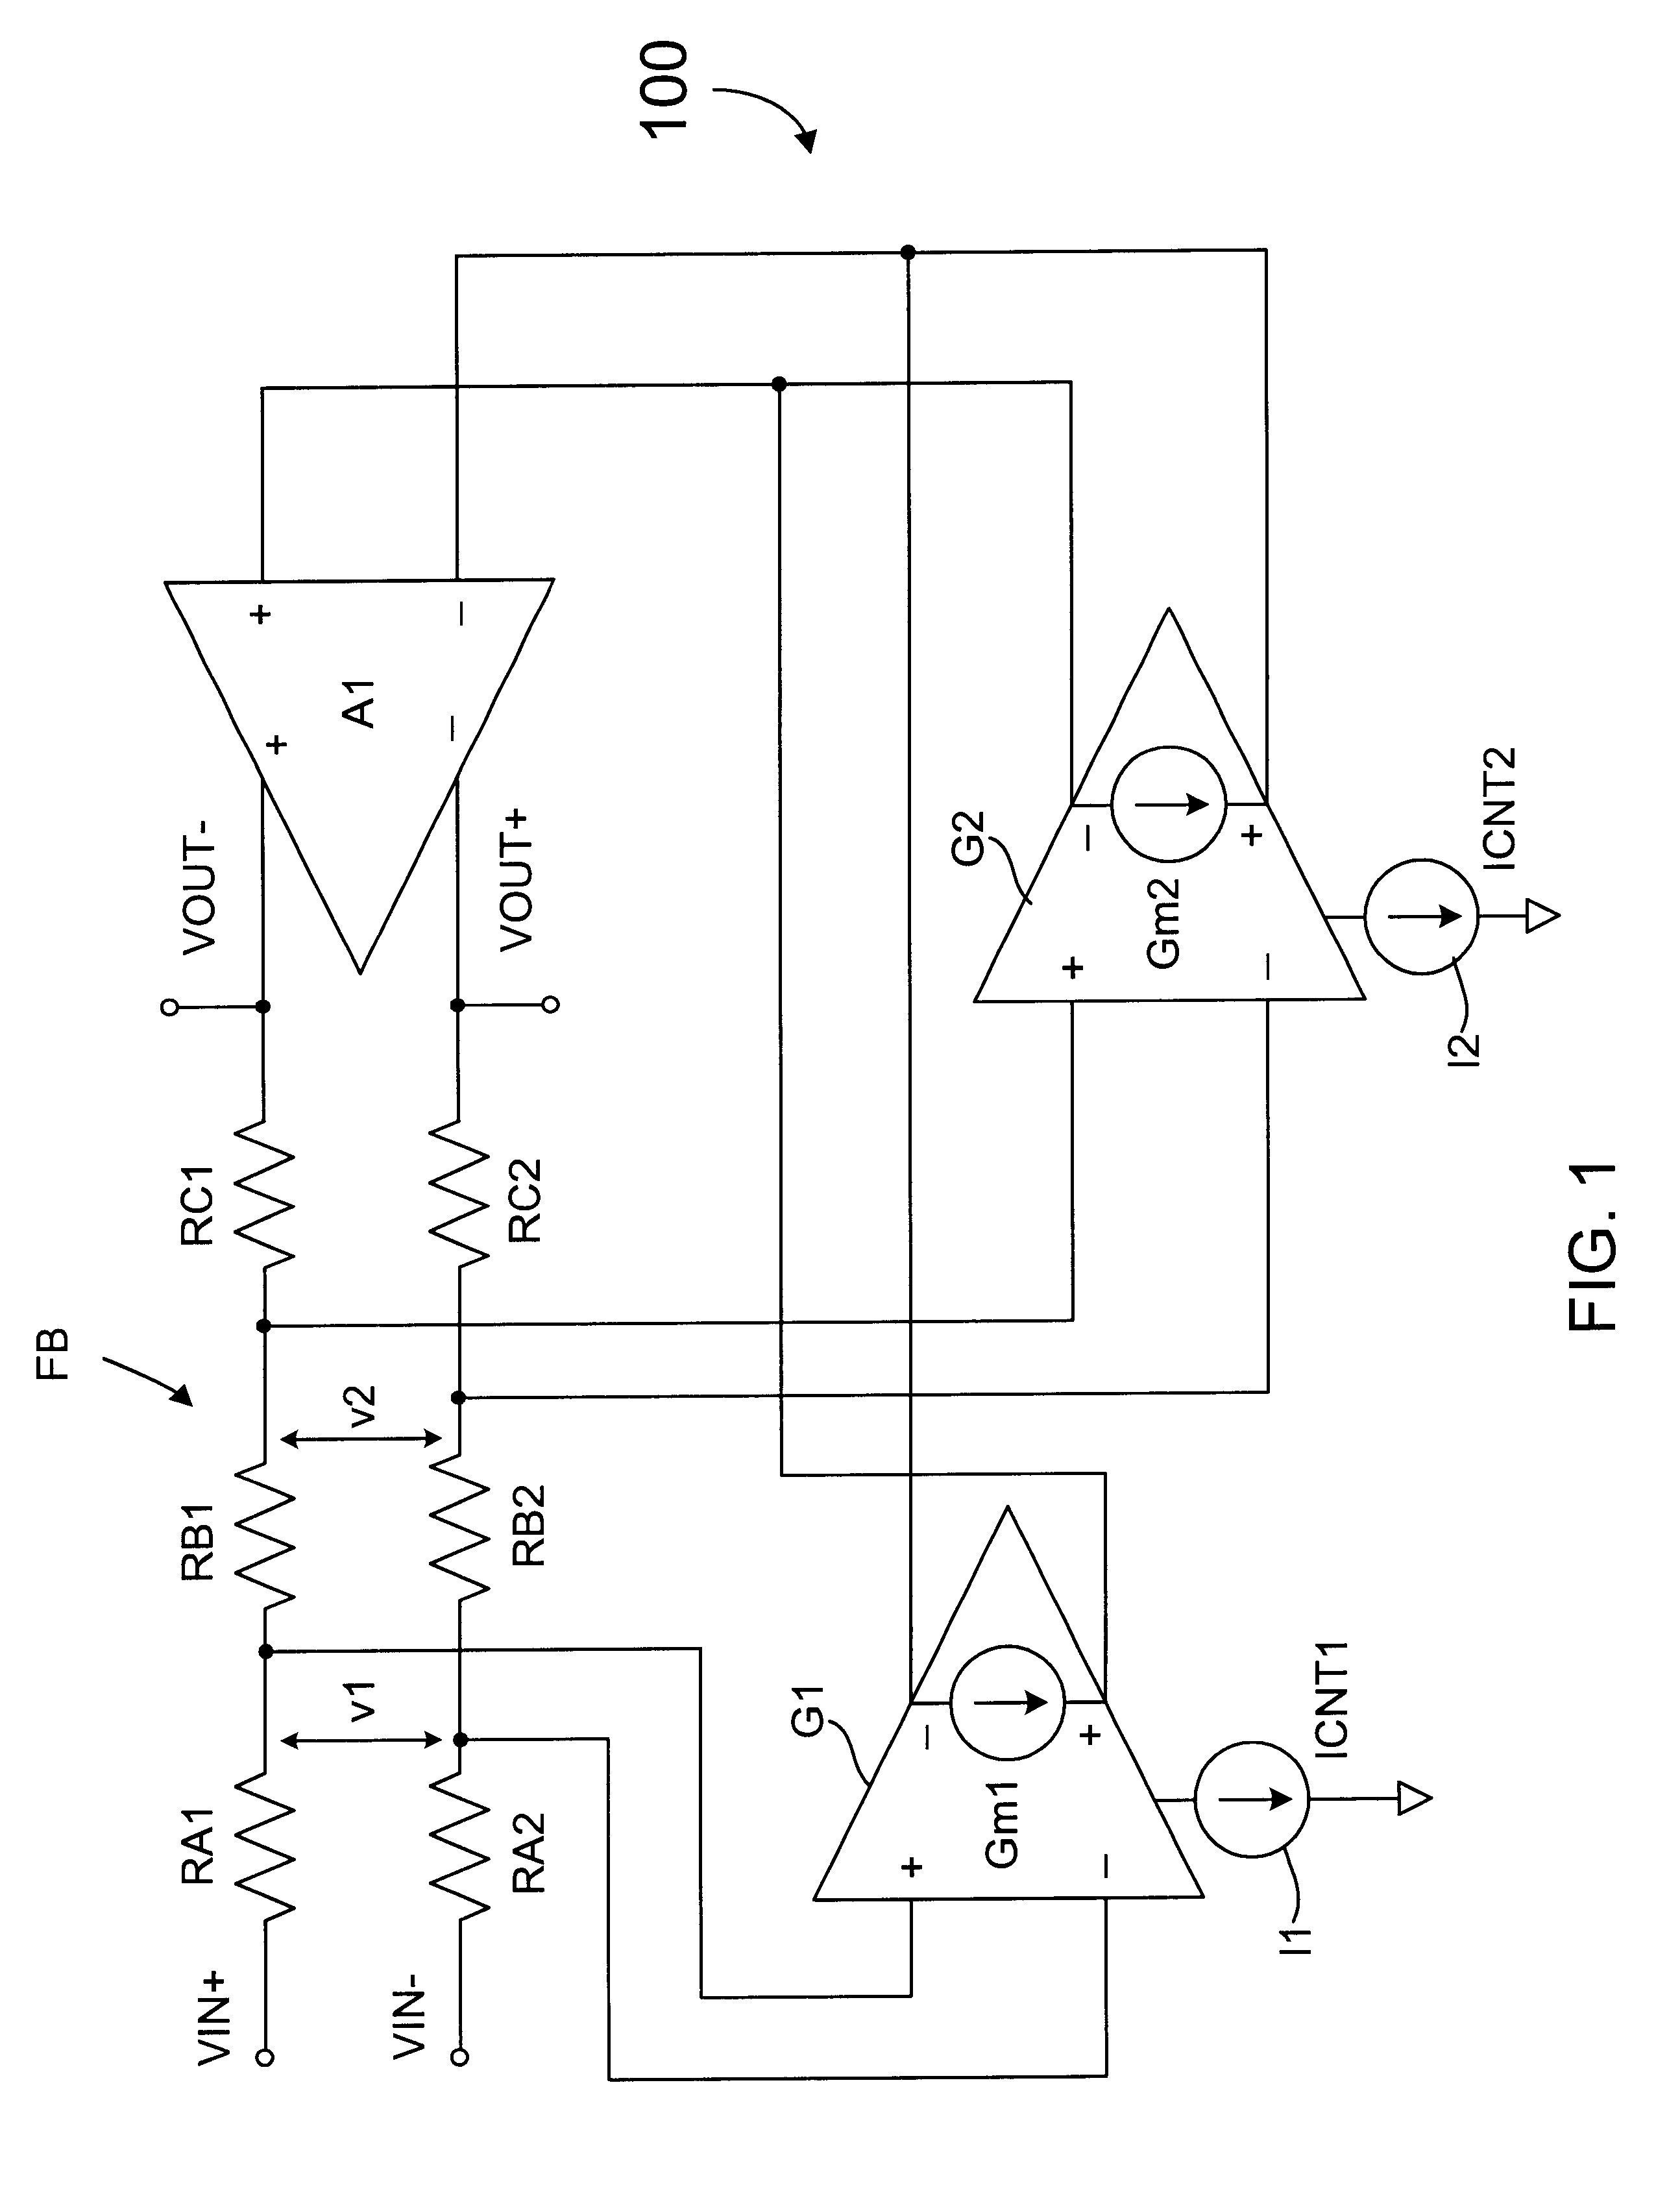 Automatic gain control circuit with high linearity and monotonically correlated offset voltage